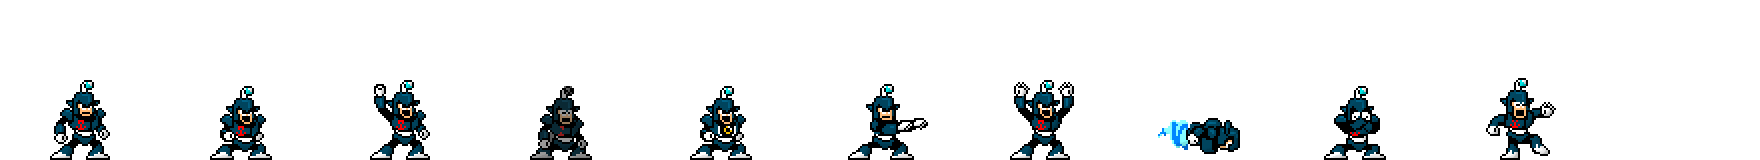 Dive Man | Base Sprite Right<div style="margin-top: 4px; letting-spacing: 1px; font-size: 90%; font-family: Courier New; color: rgb(159, 150, 172);">[robot:right:base]{dive-man}</div>